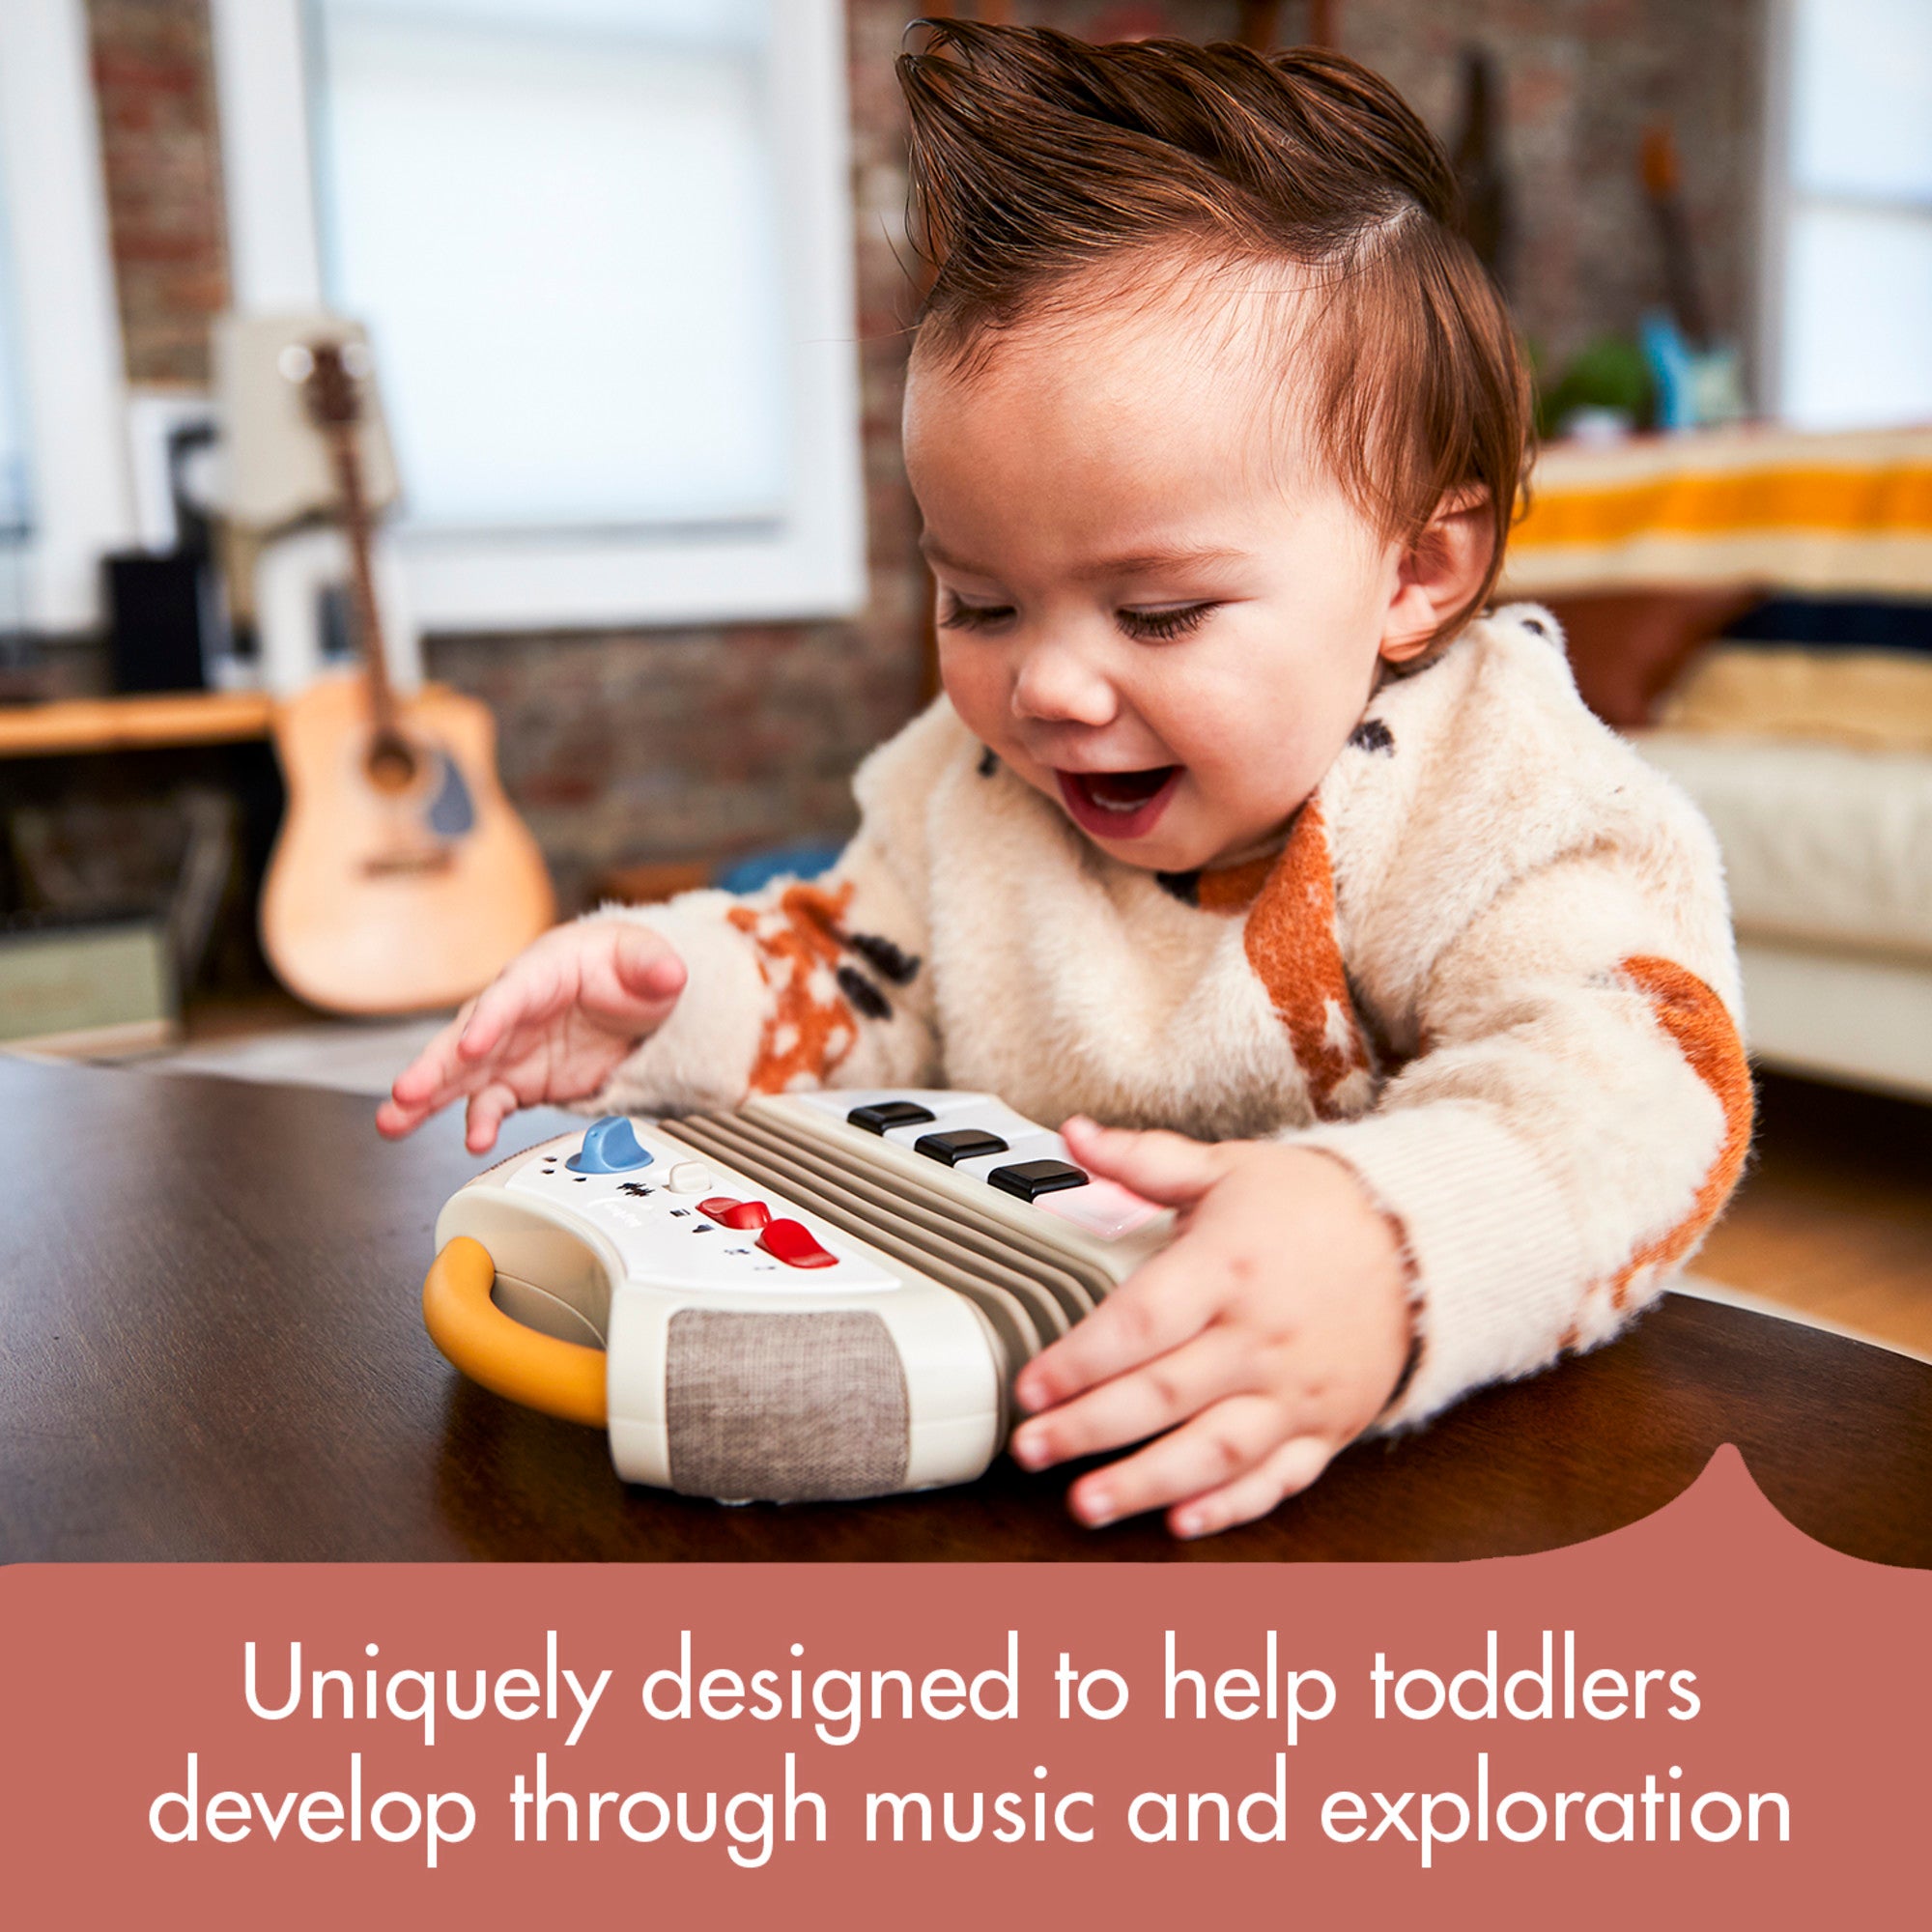 Tiny Rockers Accordion - Rewarding light-up piano keys help develop eye-hand coordination and support cognitive development